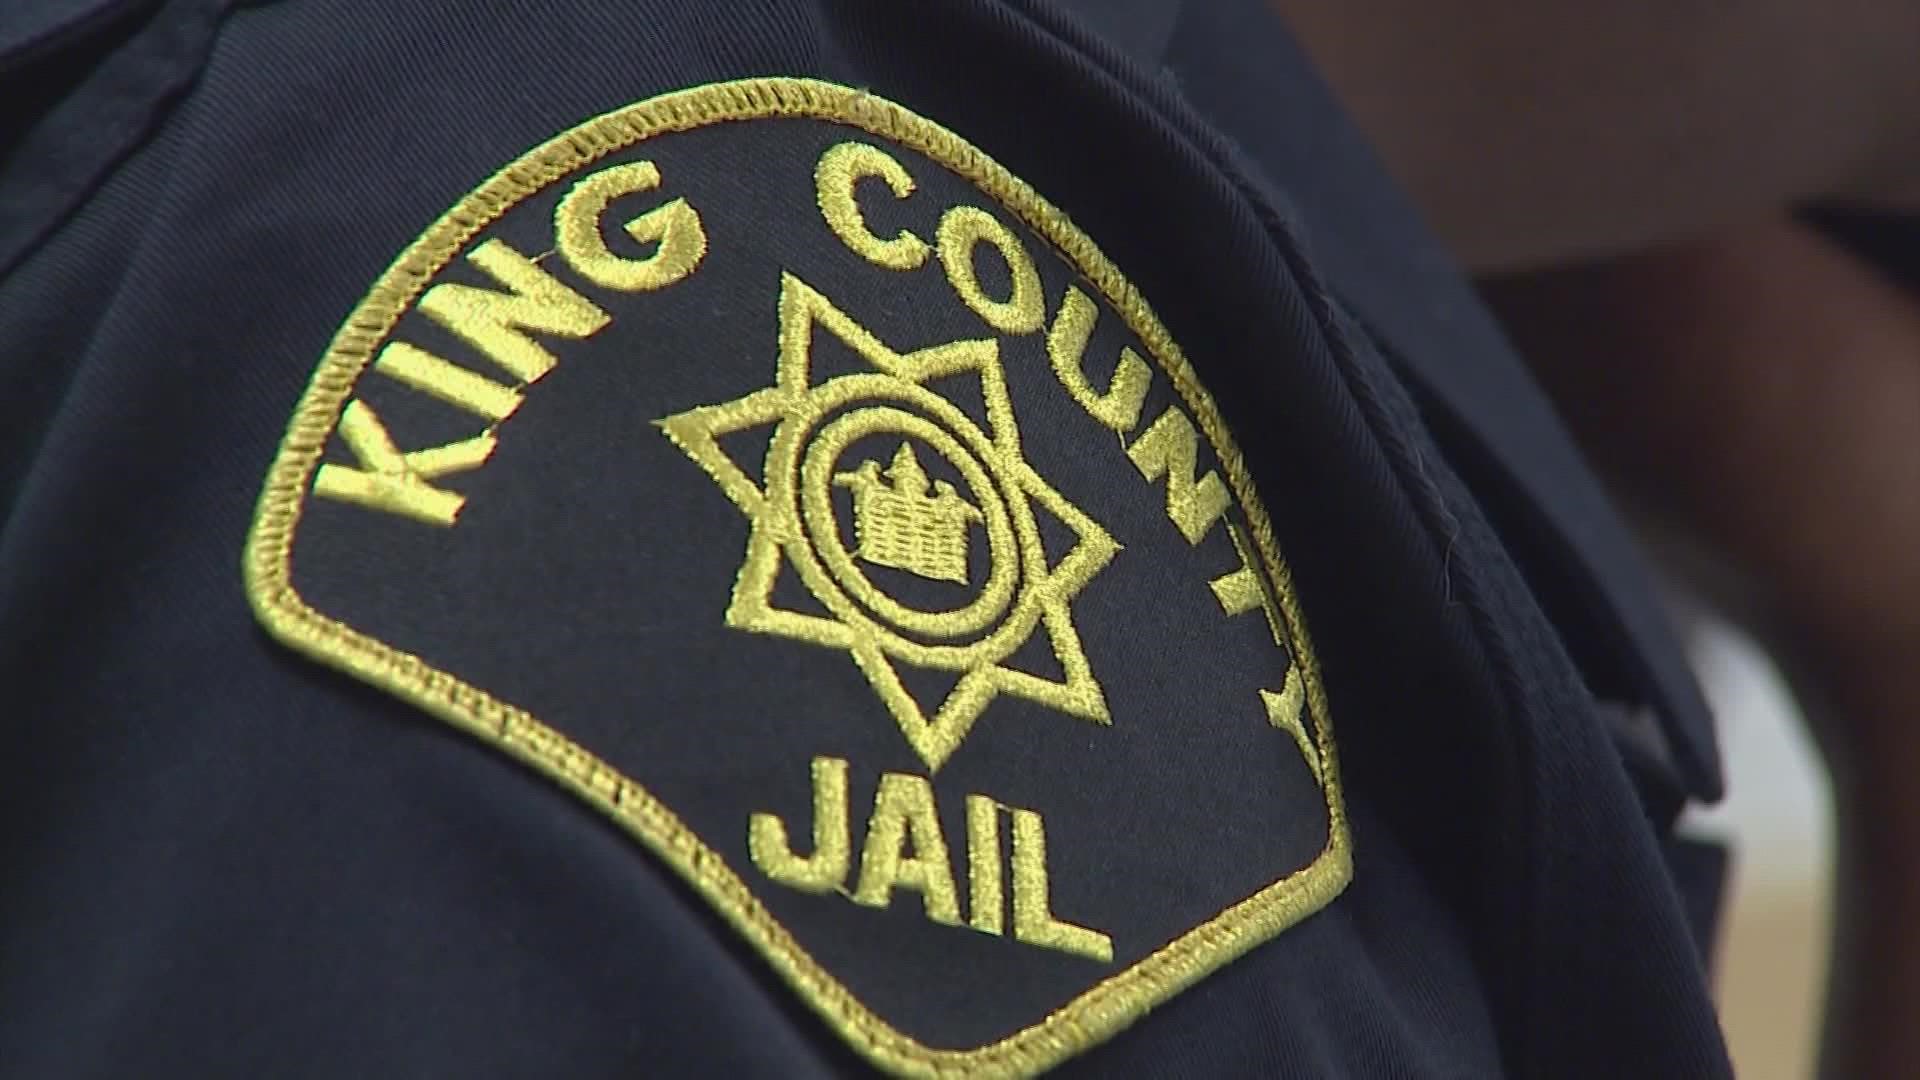 The King County Corrections Guild says officers are quitting due to burnout, as managers routinely assign mandatory 16-hour days.